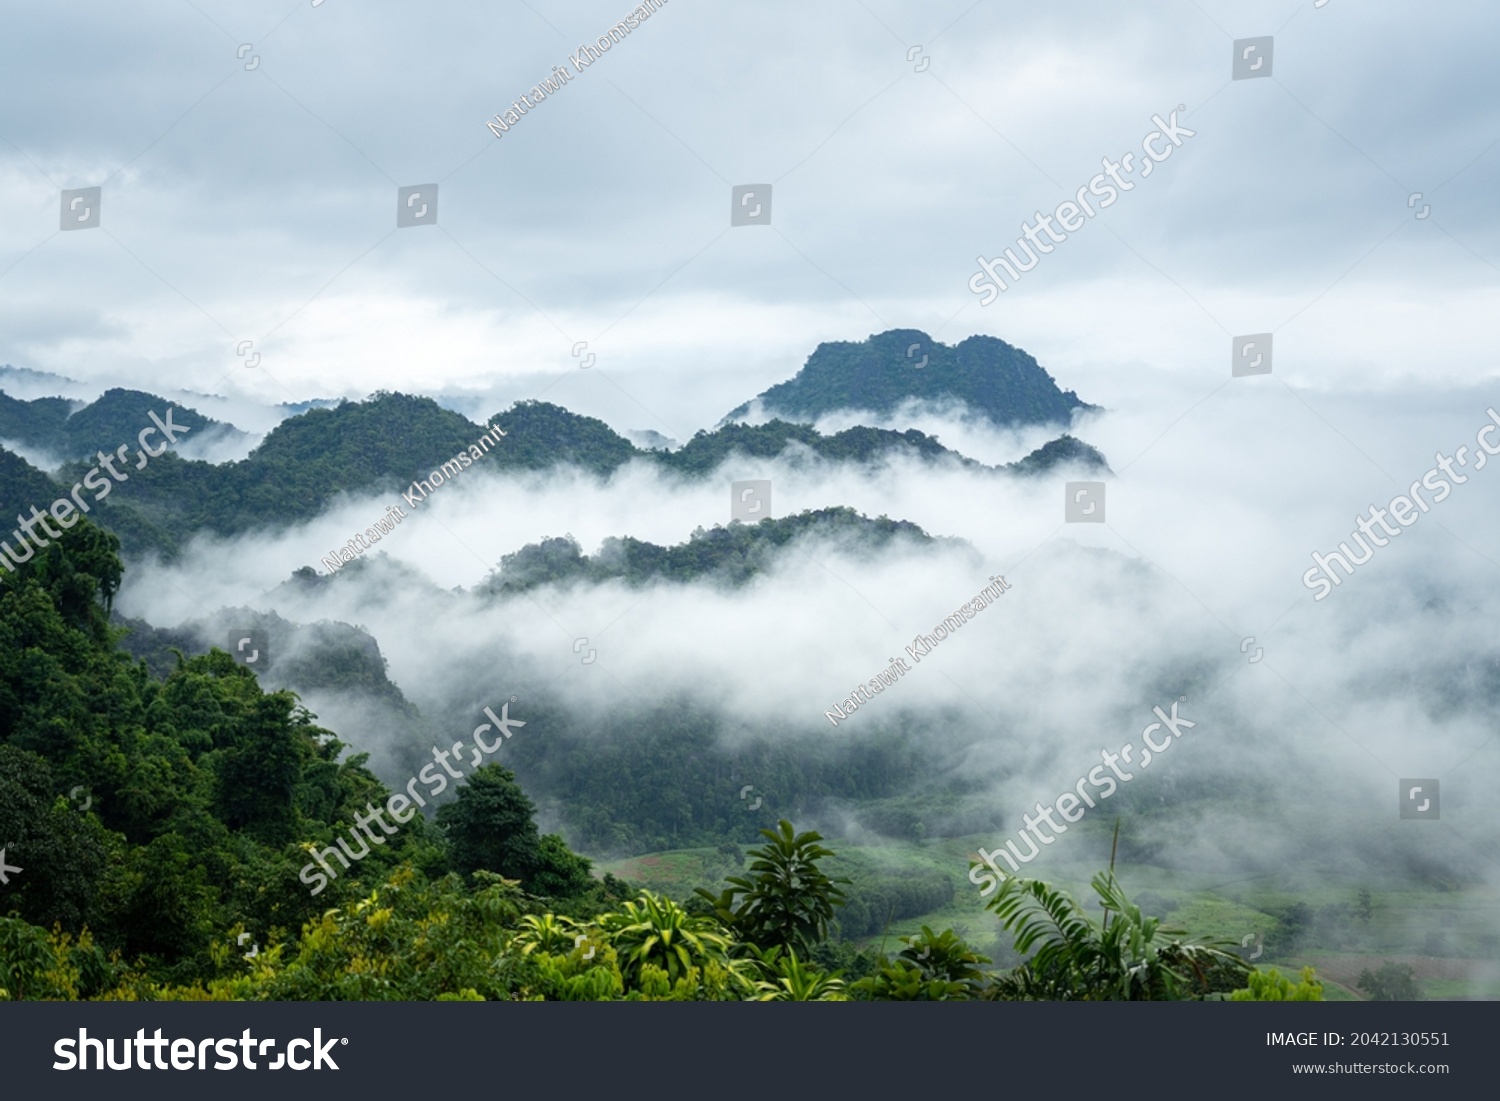 A beautiful view of mountain range with greenery forest and misty environment in the morning time. Relaxation with nature view, scenic photo seen. #2042130551